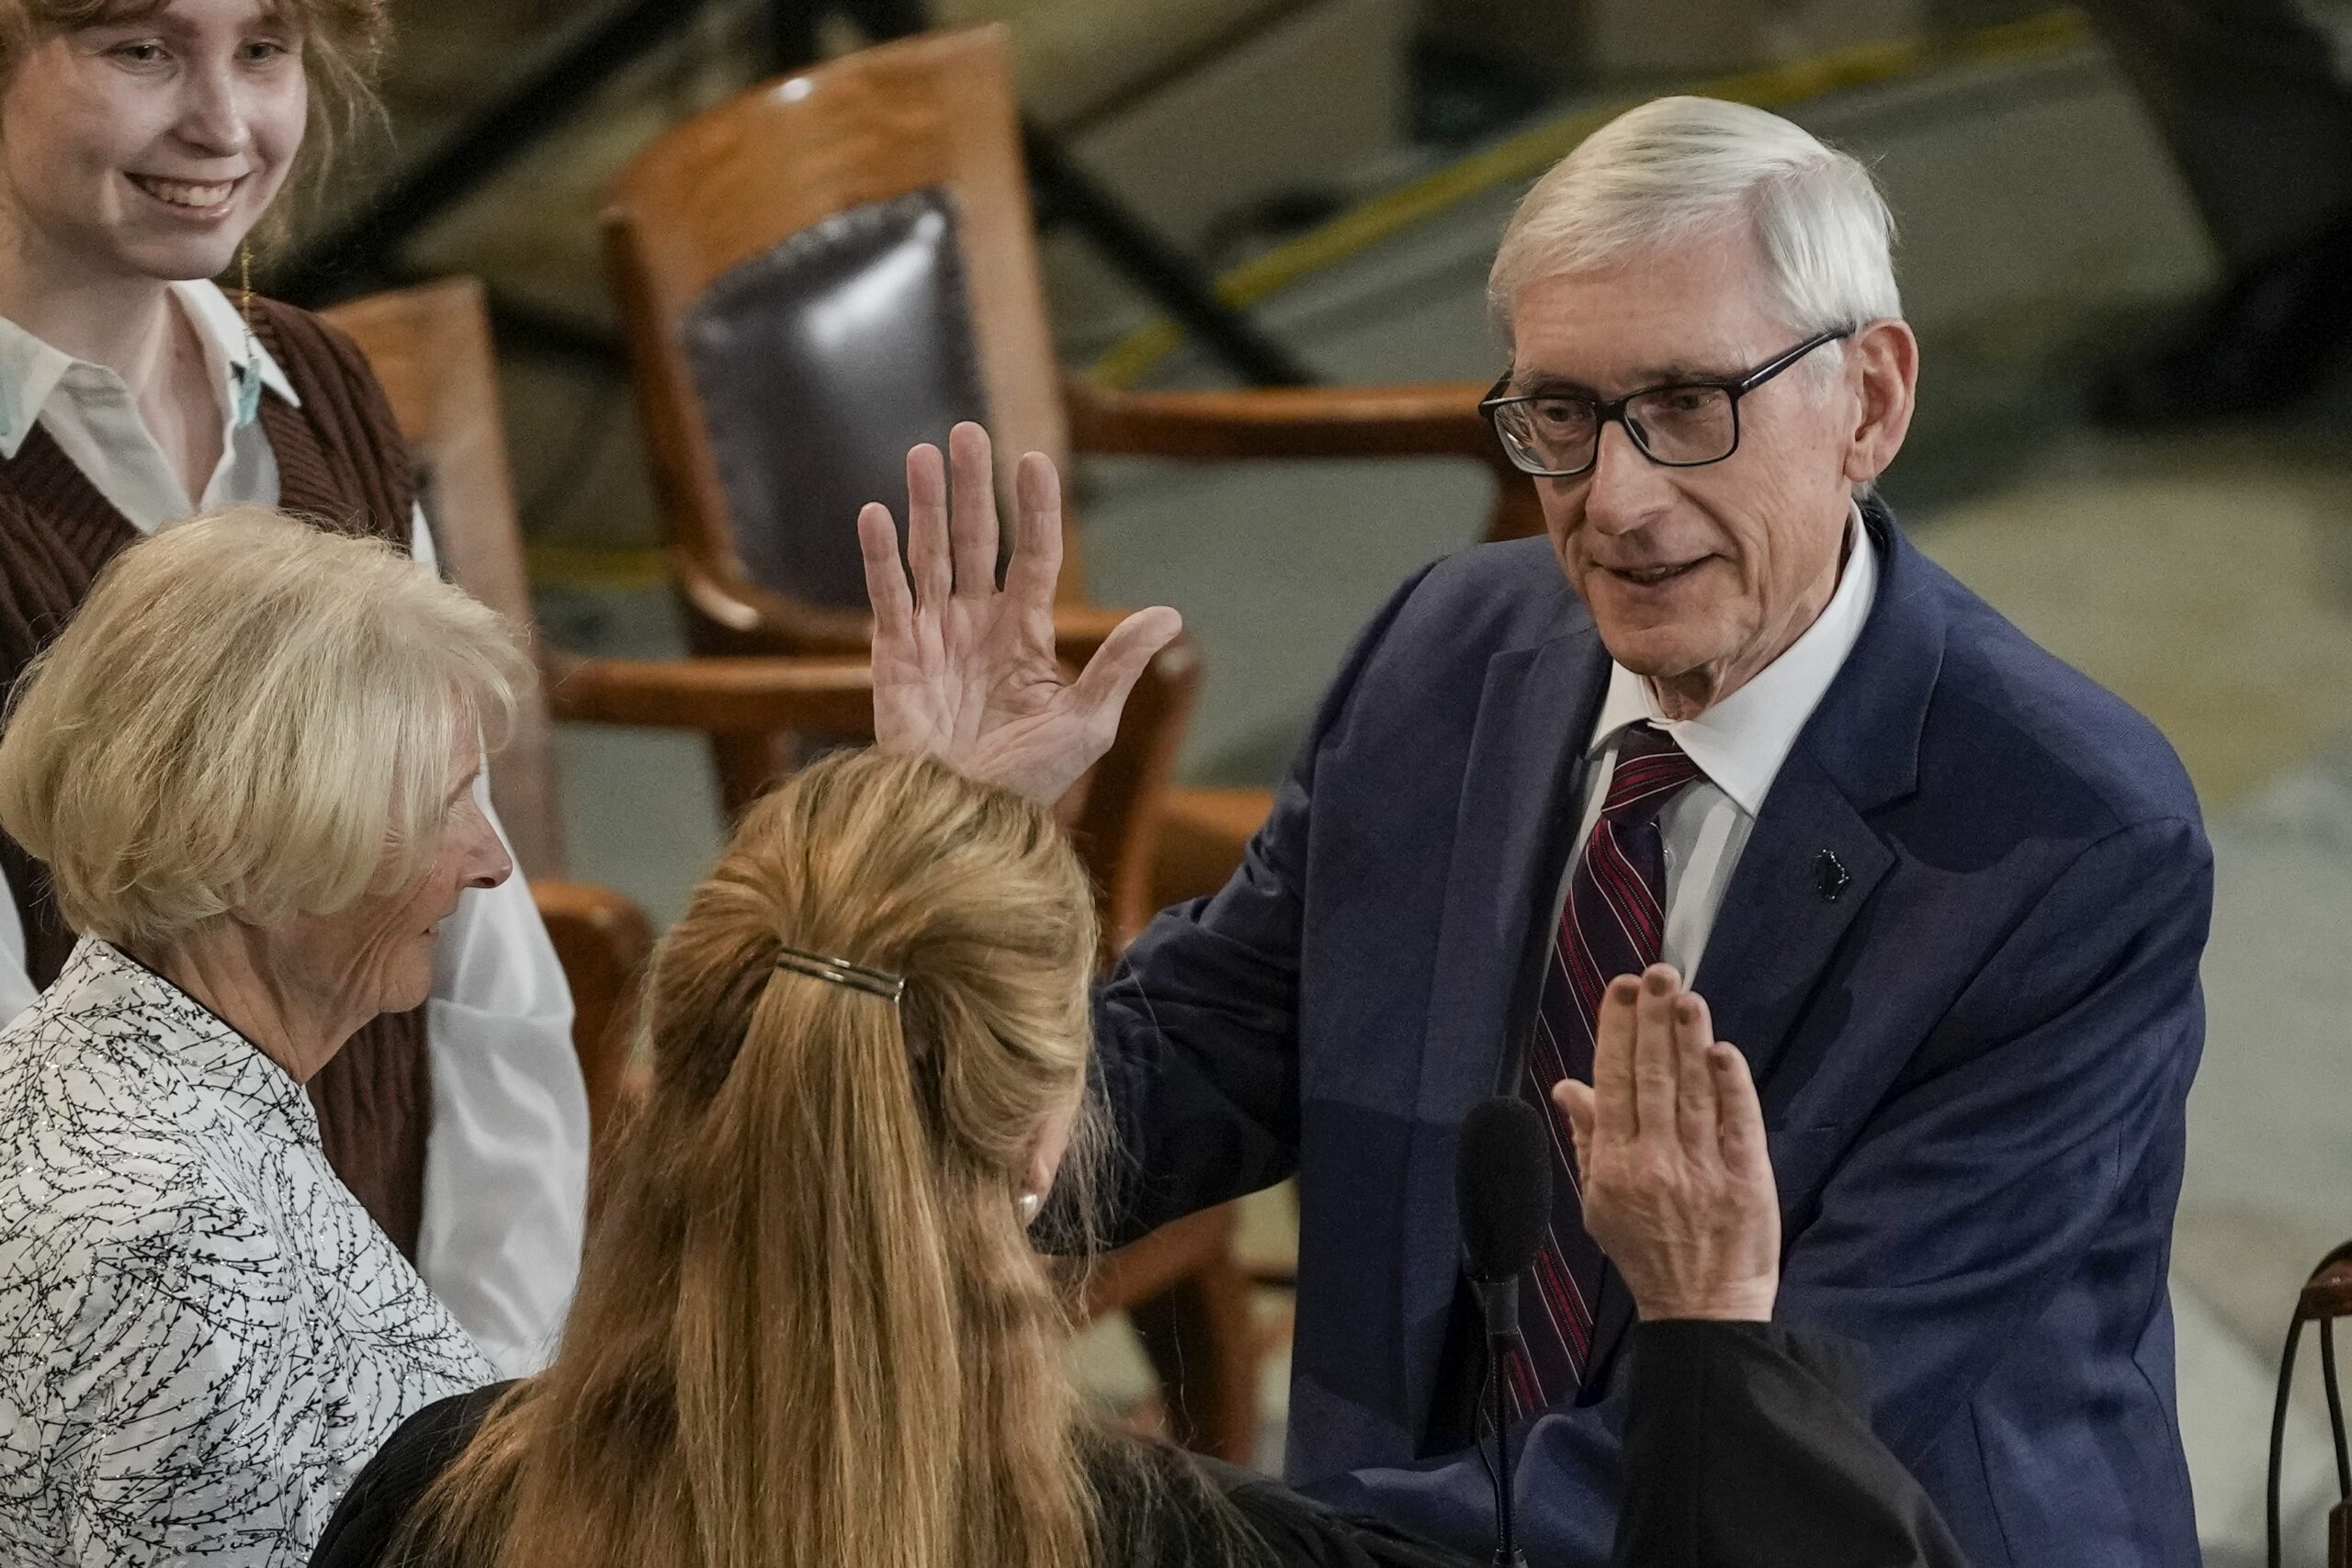 Wisconsin Gov. Tony Evers is sworn in during an inauguration ceremony